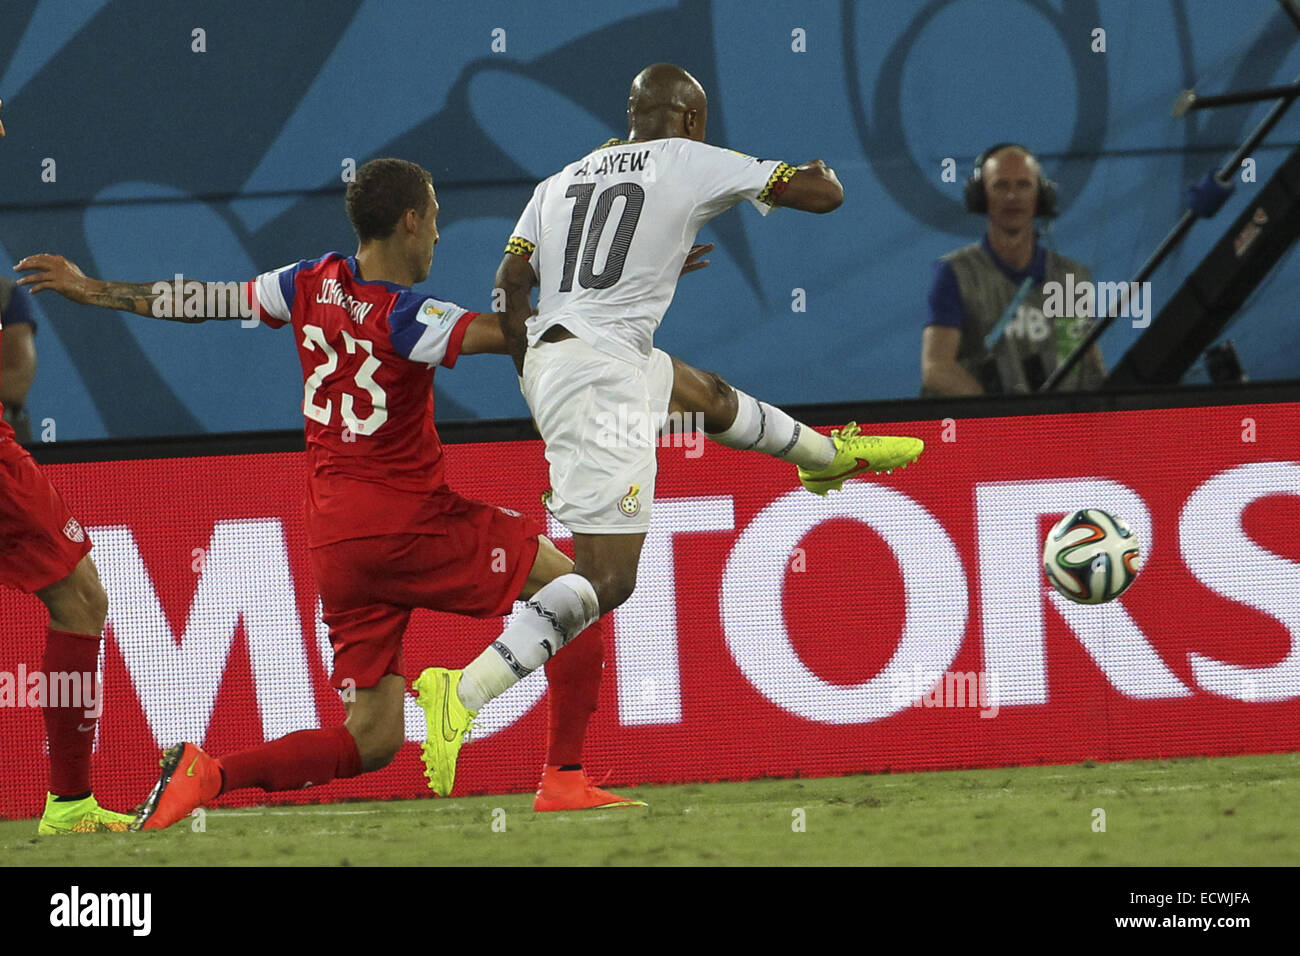 2014 FIFA World Cup - Ghana v USA - held at Arena Das Dunas. USA went on to win, 1-2  Featuring: Andre Ayew Where: Natal, RN, Brazil When: 16 Jun 2014 Stock Photo